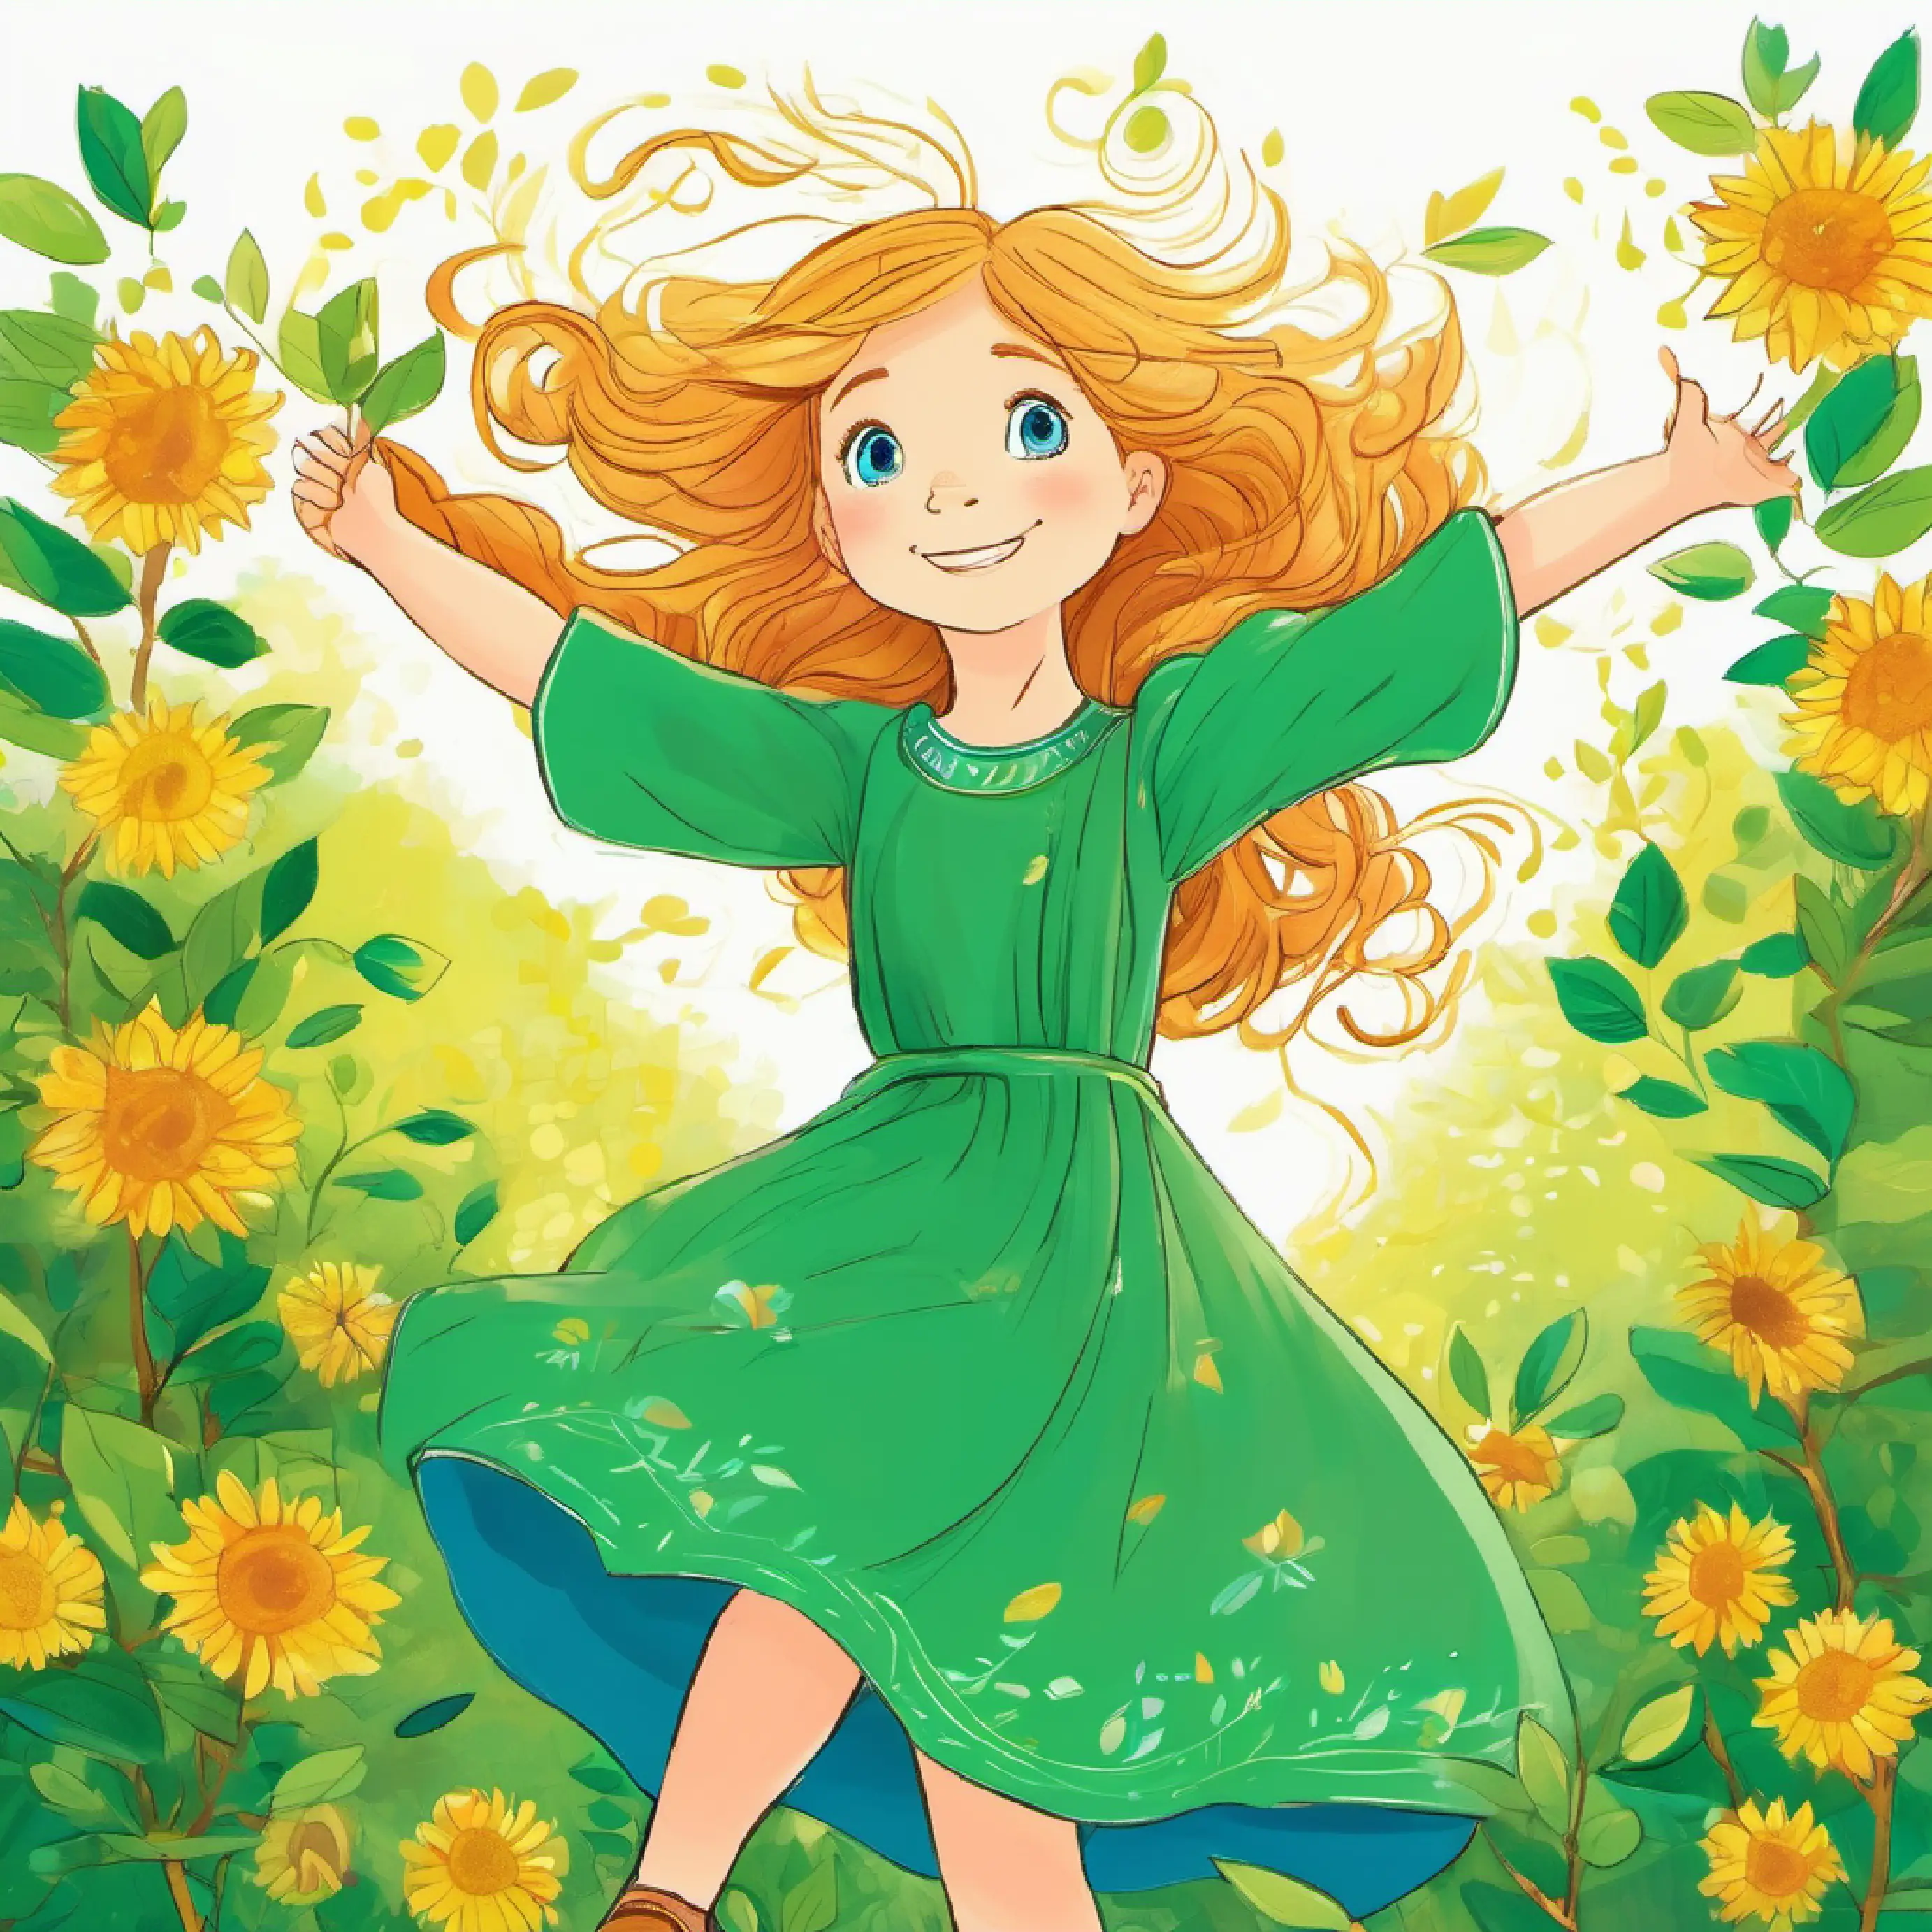 Girl with sunny hair, full of hope, bright blue eyes, wears a green dress gaining confidence with each branch she conquers.